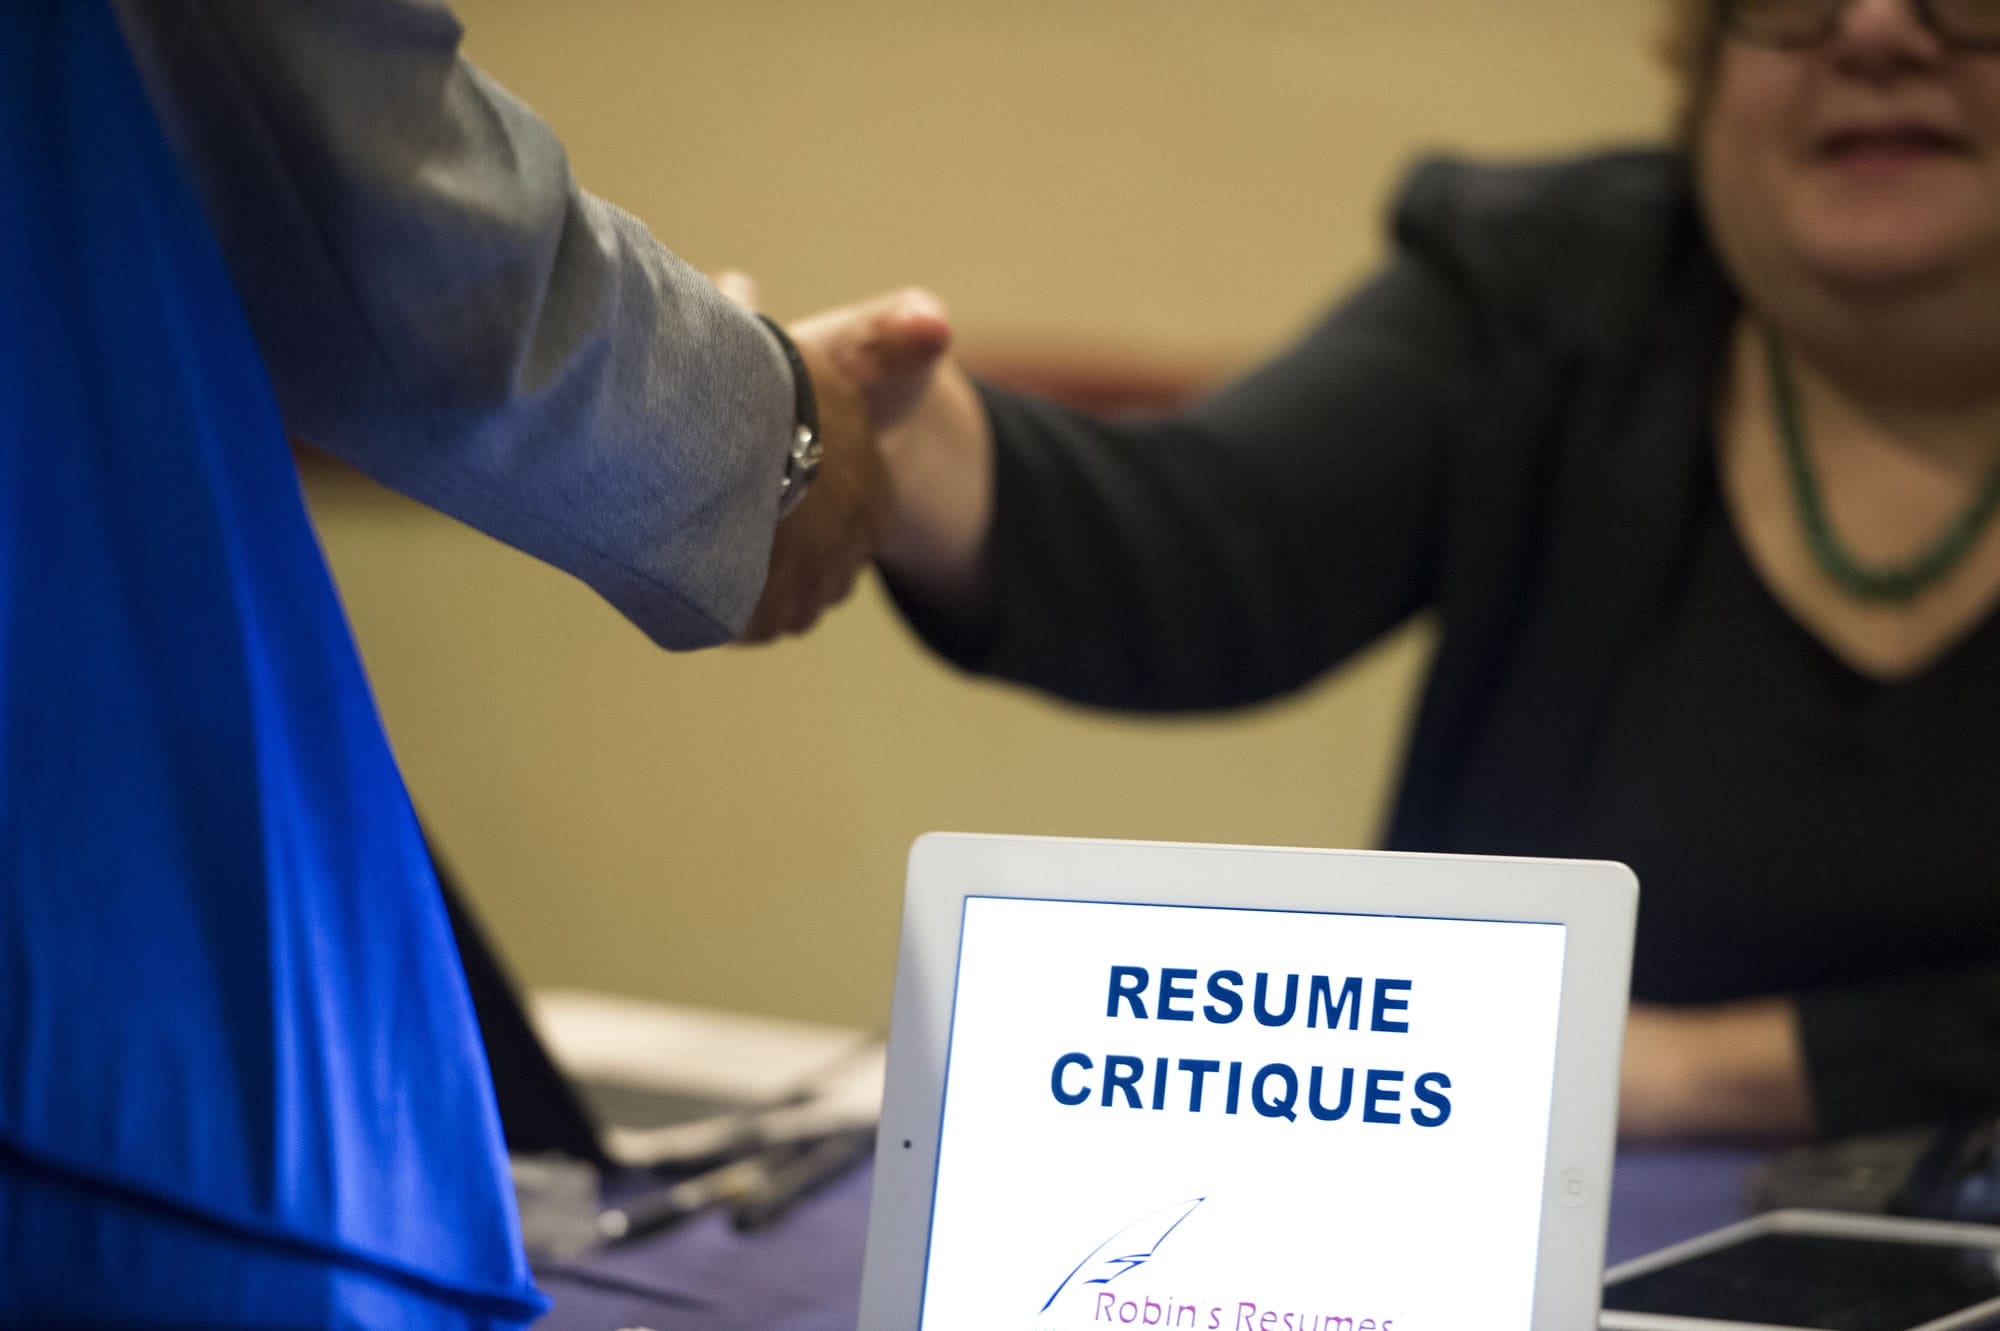 A job seeker stops at a table offering resume critiques during a job fair in Atlanta.